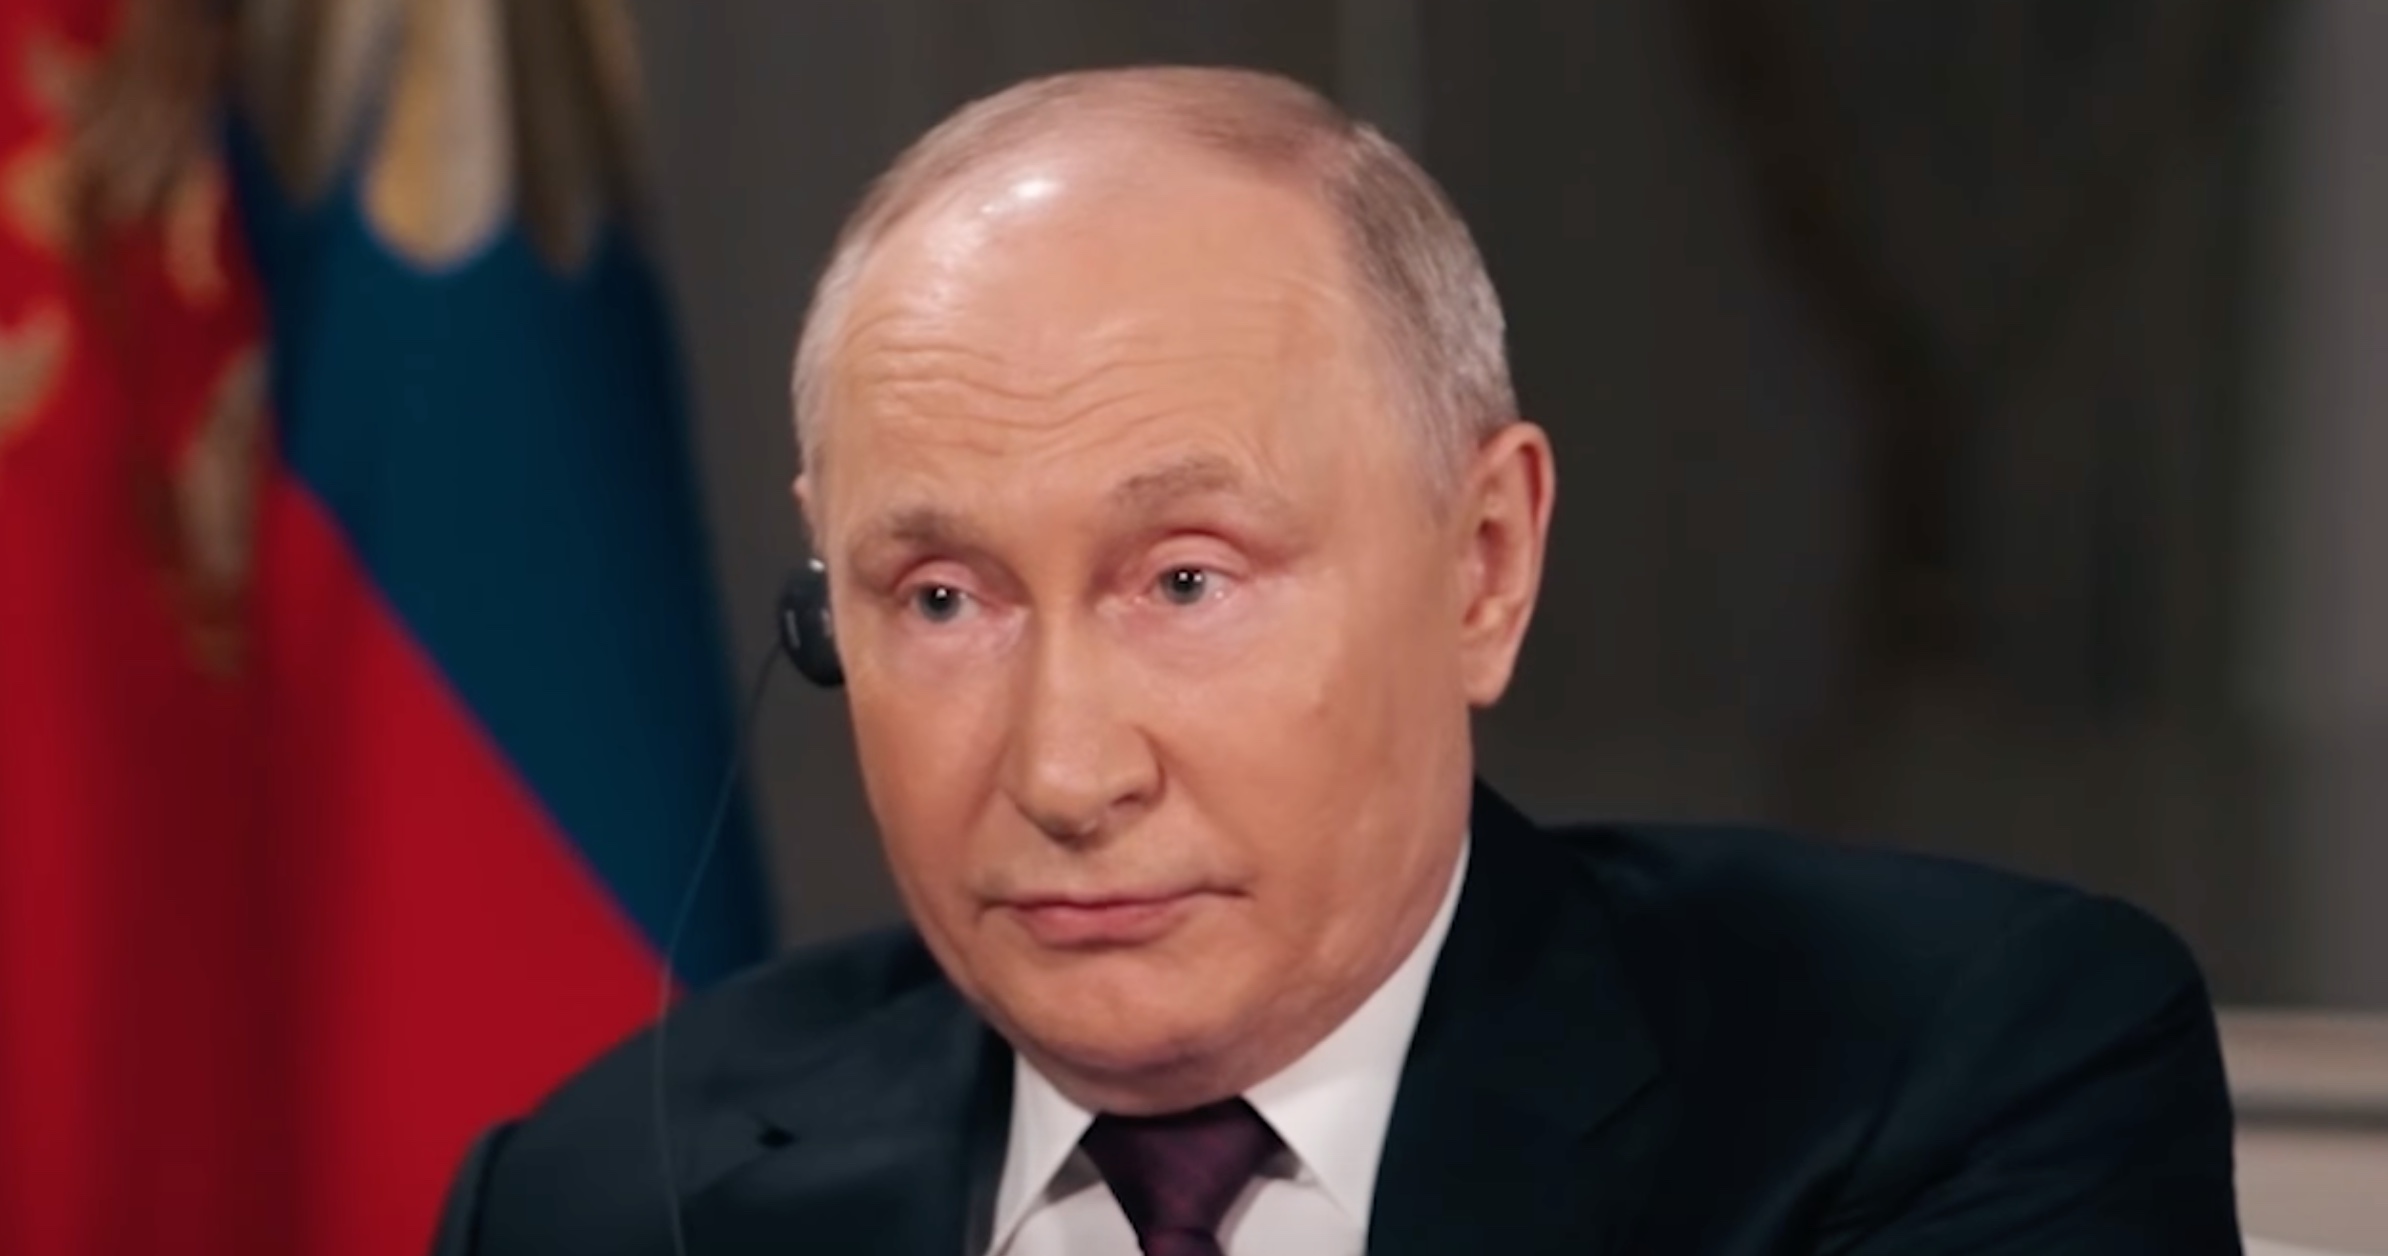 Putin Pierces Tucker With ‘Chilling Stare’ As He Boasts About New ...